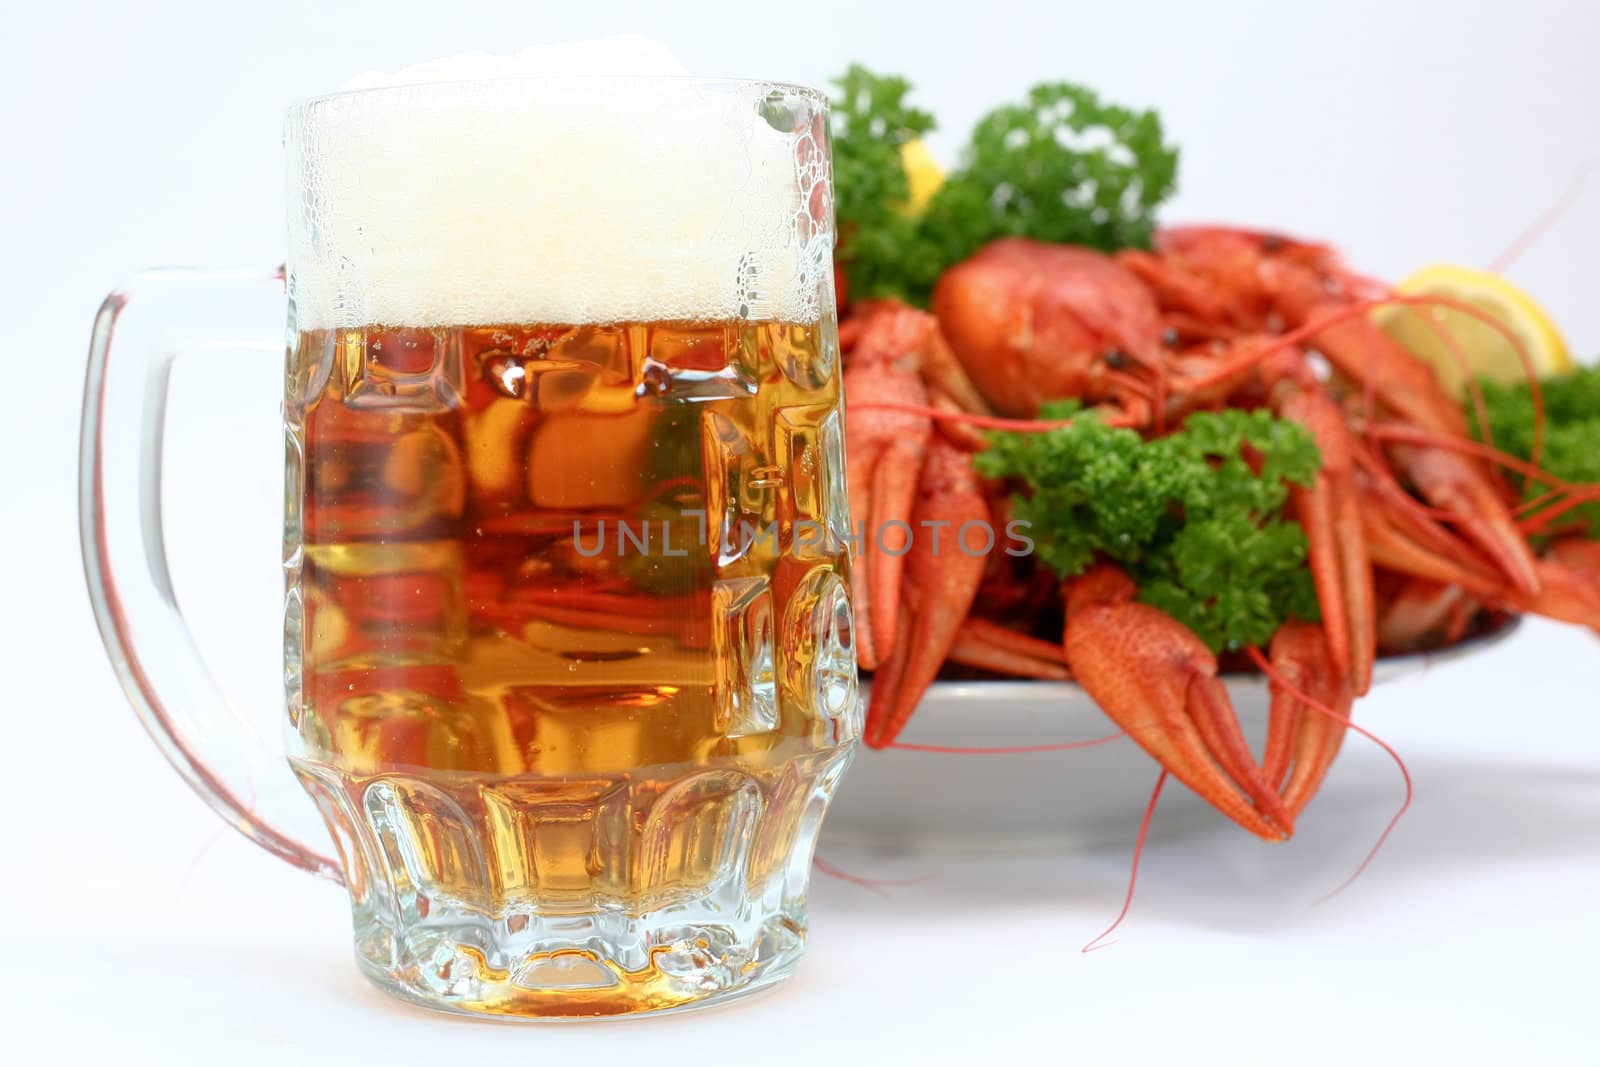 Crayfishs with beer on a neutral background